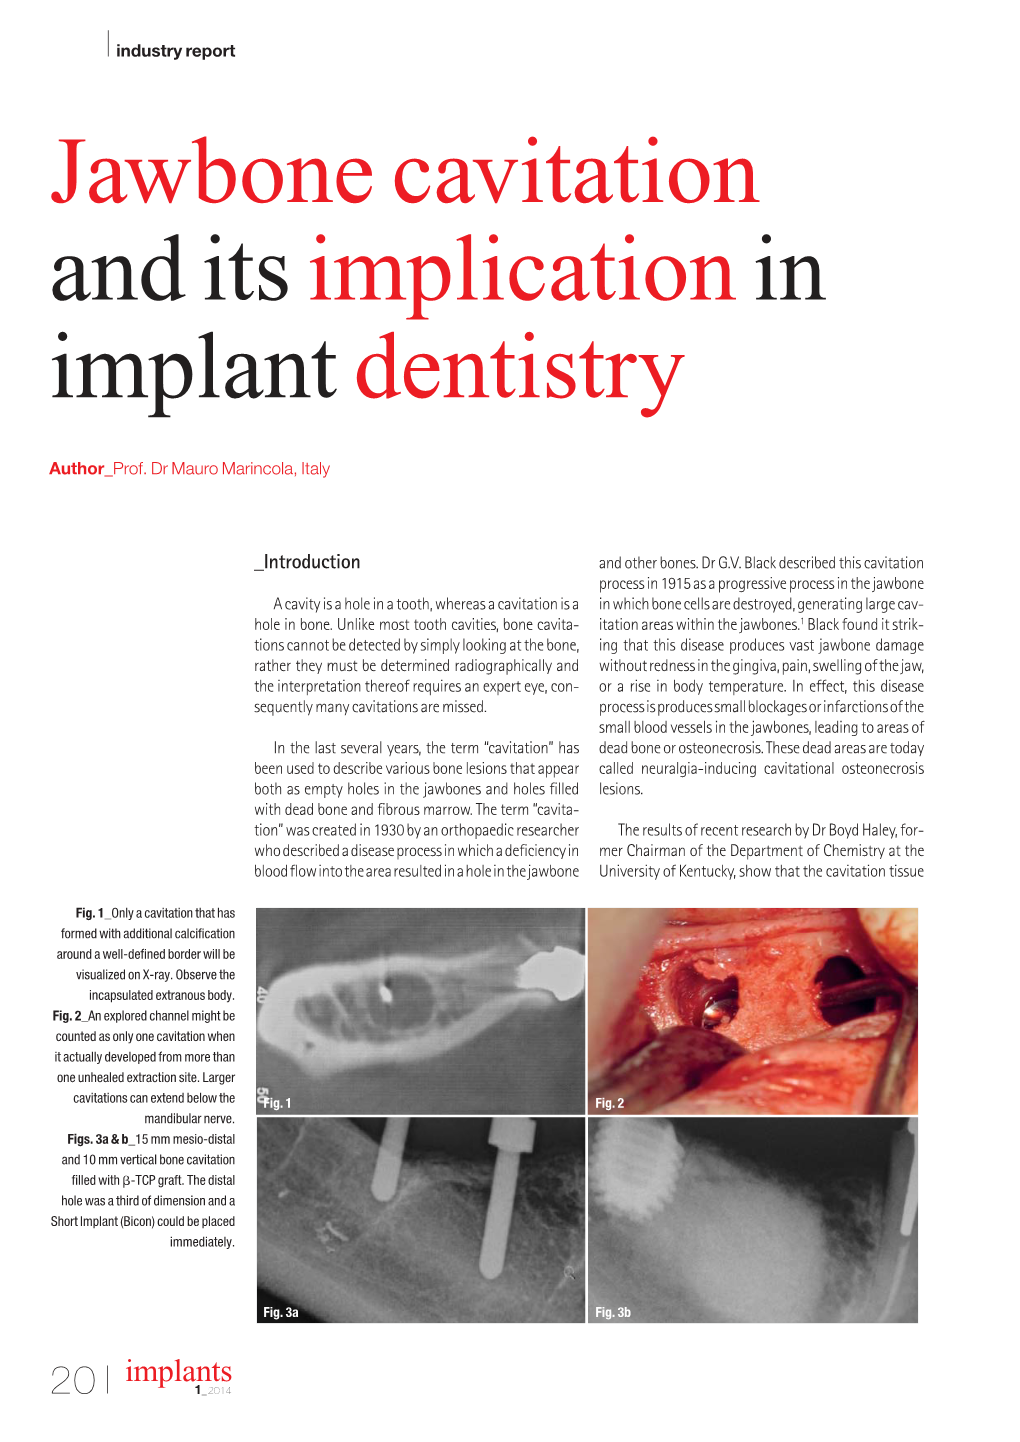 Jawbone Cavitation and Its Implication in Implant Dentistry